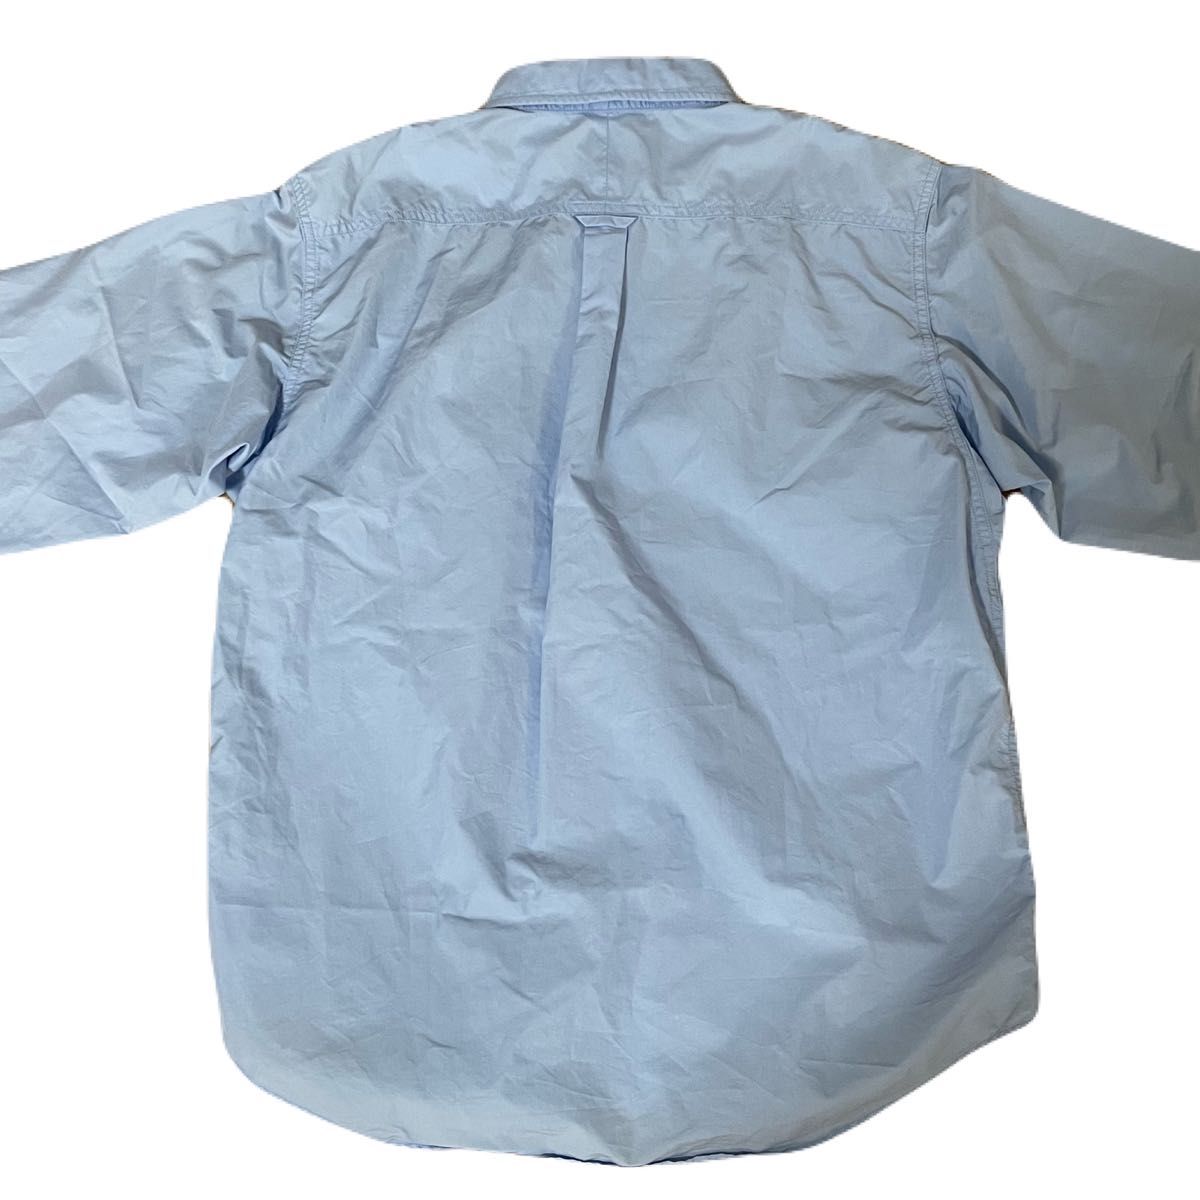 THE NORTH FACE / PURPLE LABEL Cotton Polyester Typewriter Shirt